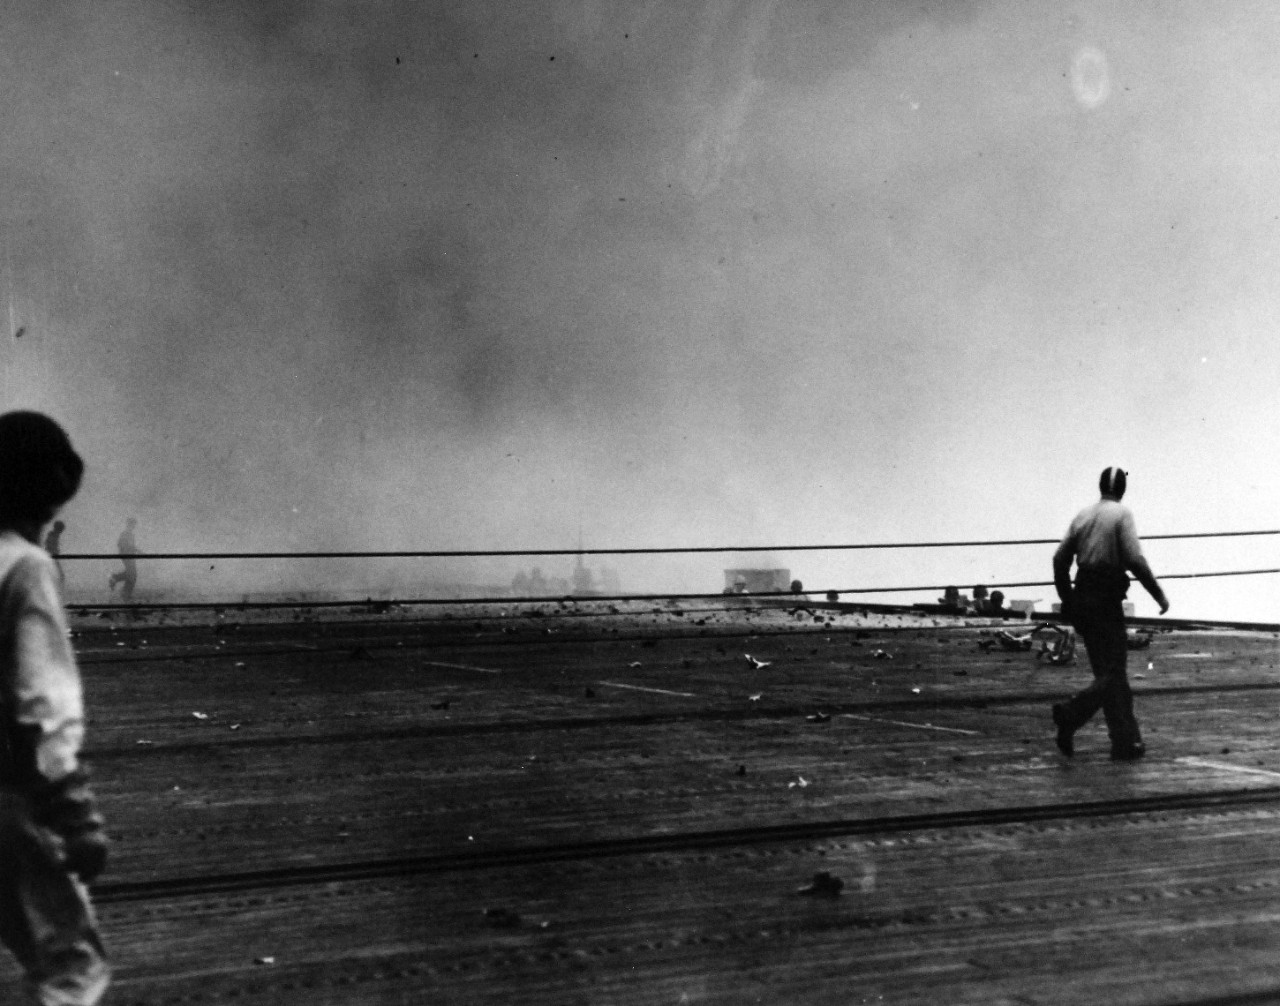 80-G-384159:  Battle of Leyte Gulf, 24-26 October 1944.   USS White Plains (CVE-66) after suicide dive by Japanese “Zeke.”  Smoke from explosion still present.     White Plains served with Task Group 77.4 during the battle and was assigned to Taffy 3, led by Rear Admiral C.A.F. Sprague.    Official U.S. Navy Photograph, now in the collections of the National Archives.     (2015/3/4/2015). 